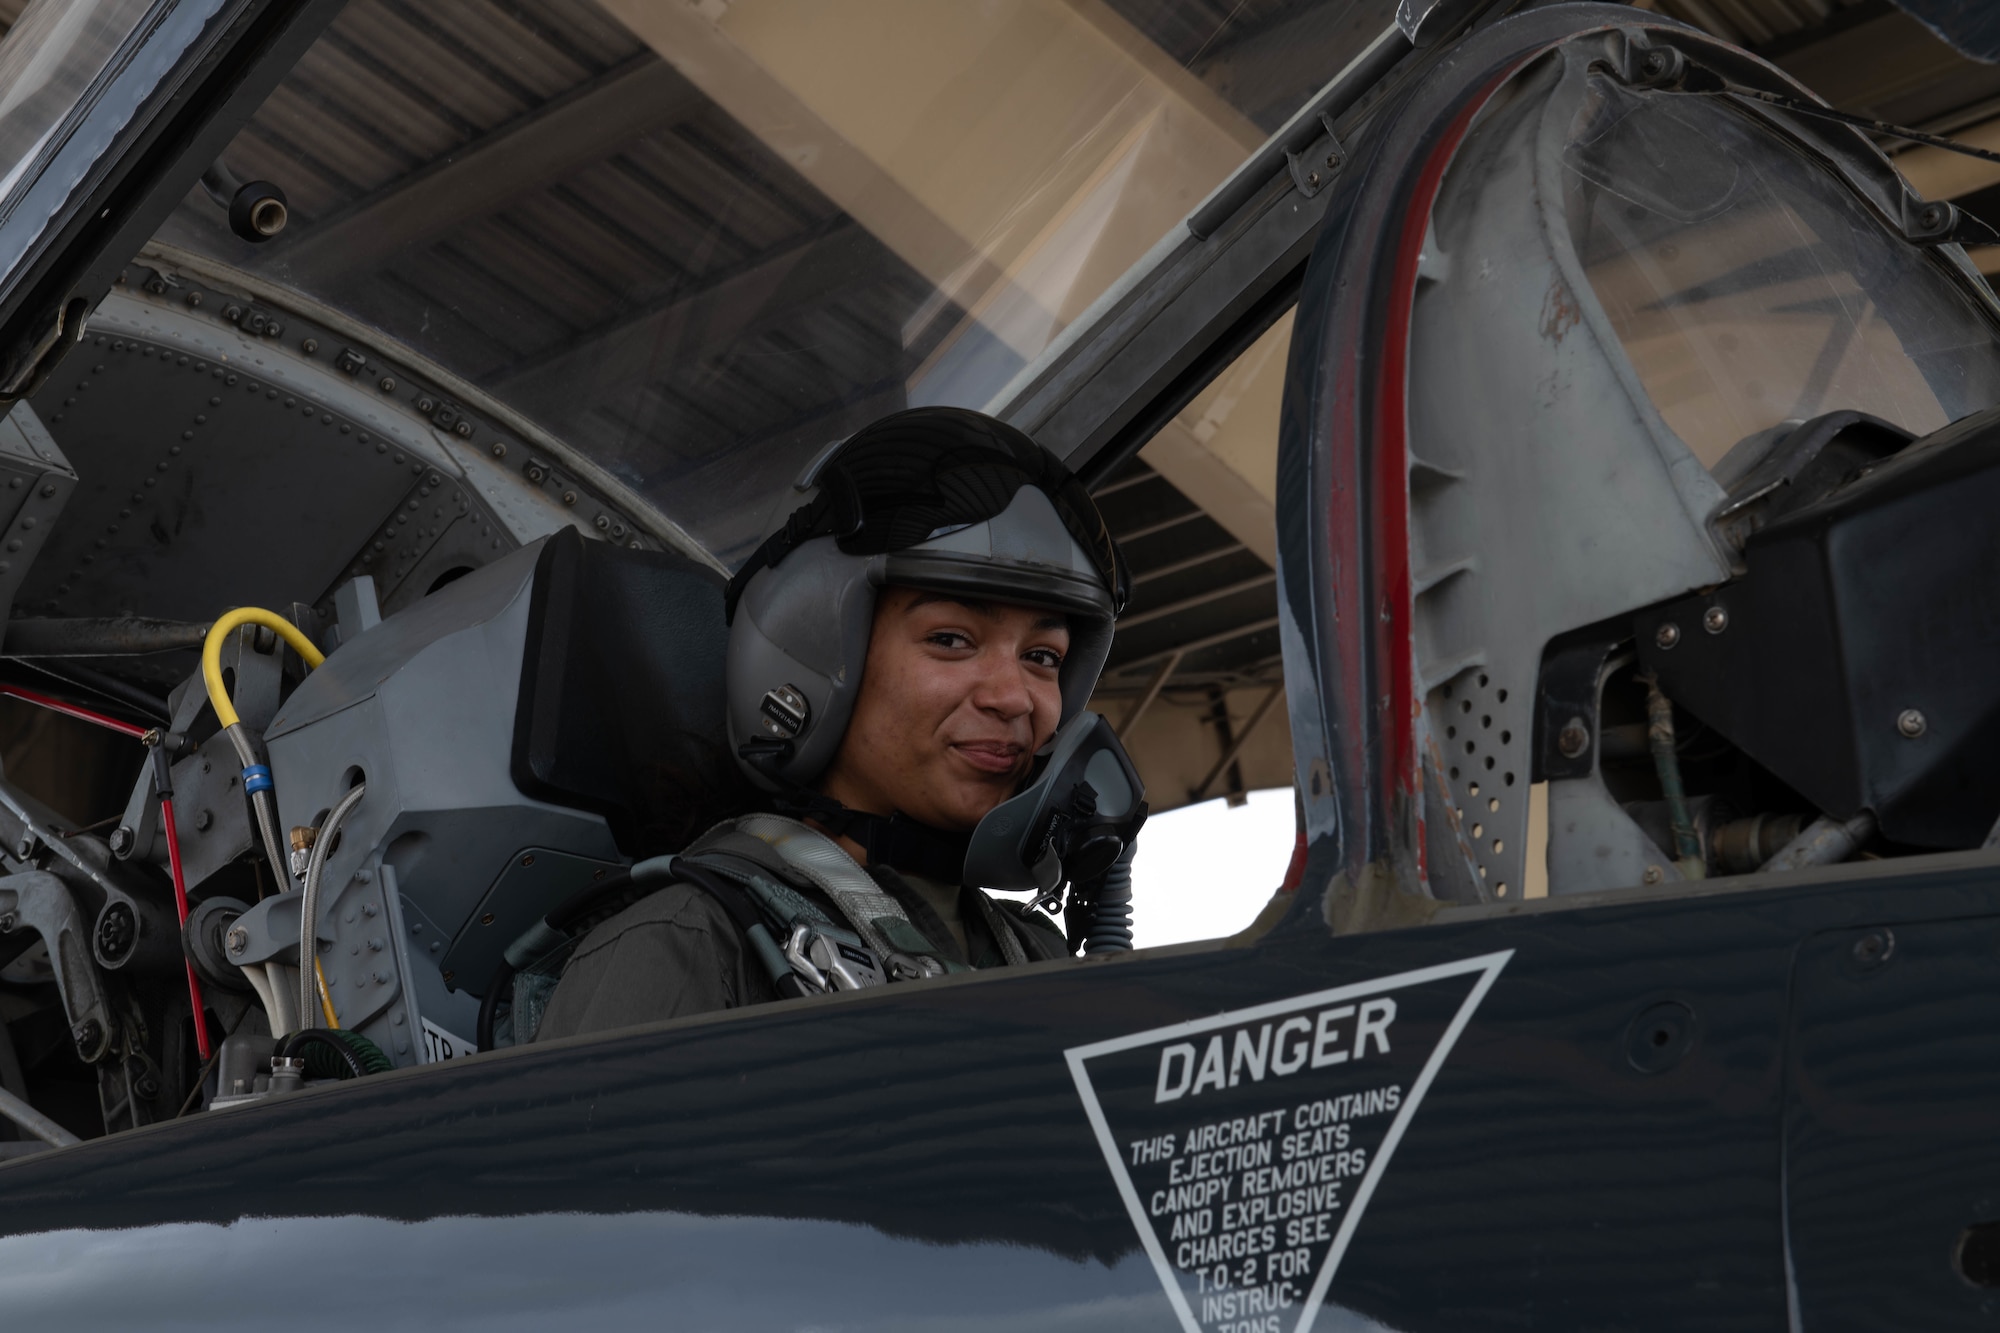 U.S. Air Force Staff Sgt. Alana Mullins, a 509th Operations Support Squadron radar, airfield, and weather systems technician, prepares for a flight in the T-38 Talon at Whiteman Air Force Base, Missouri, April 28, 2021. T-38 familiarization flights give non-flying Airmen hands on experience with the airframes they support. (U.S. Air Force photo by Airman 1st Class Devan Halstead)